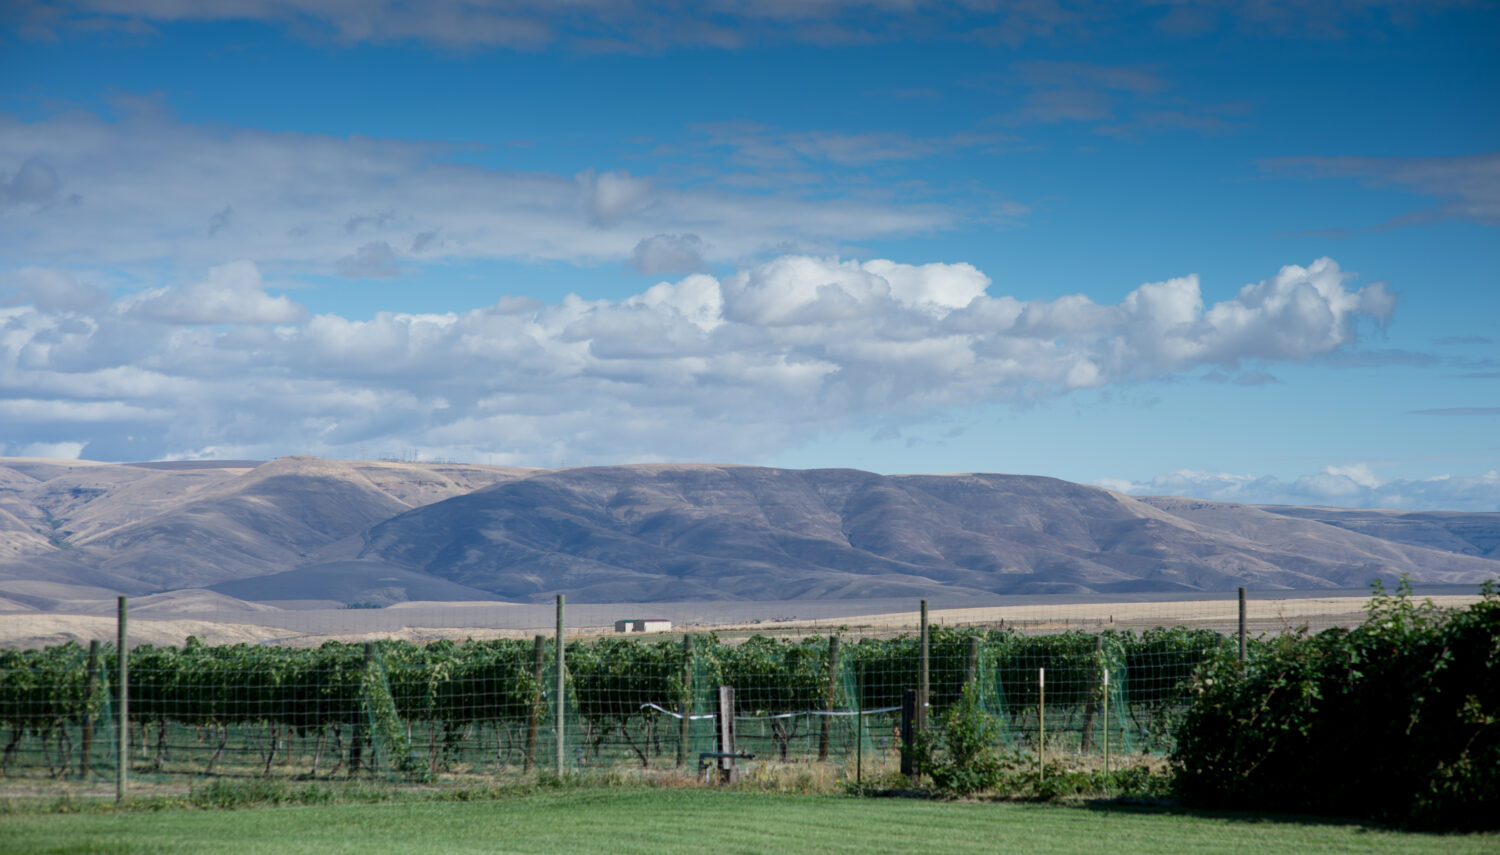 Green rows of vines and green grass with blue rolling hills in the distance. A blue sky with puffy white clouds are above.